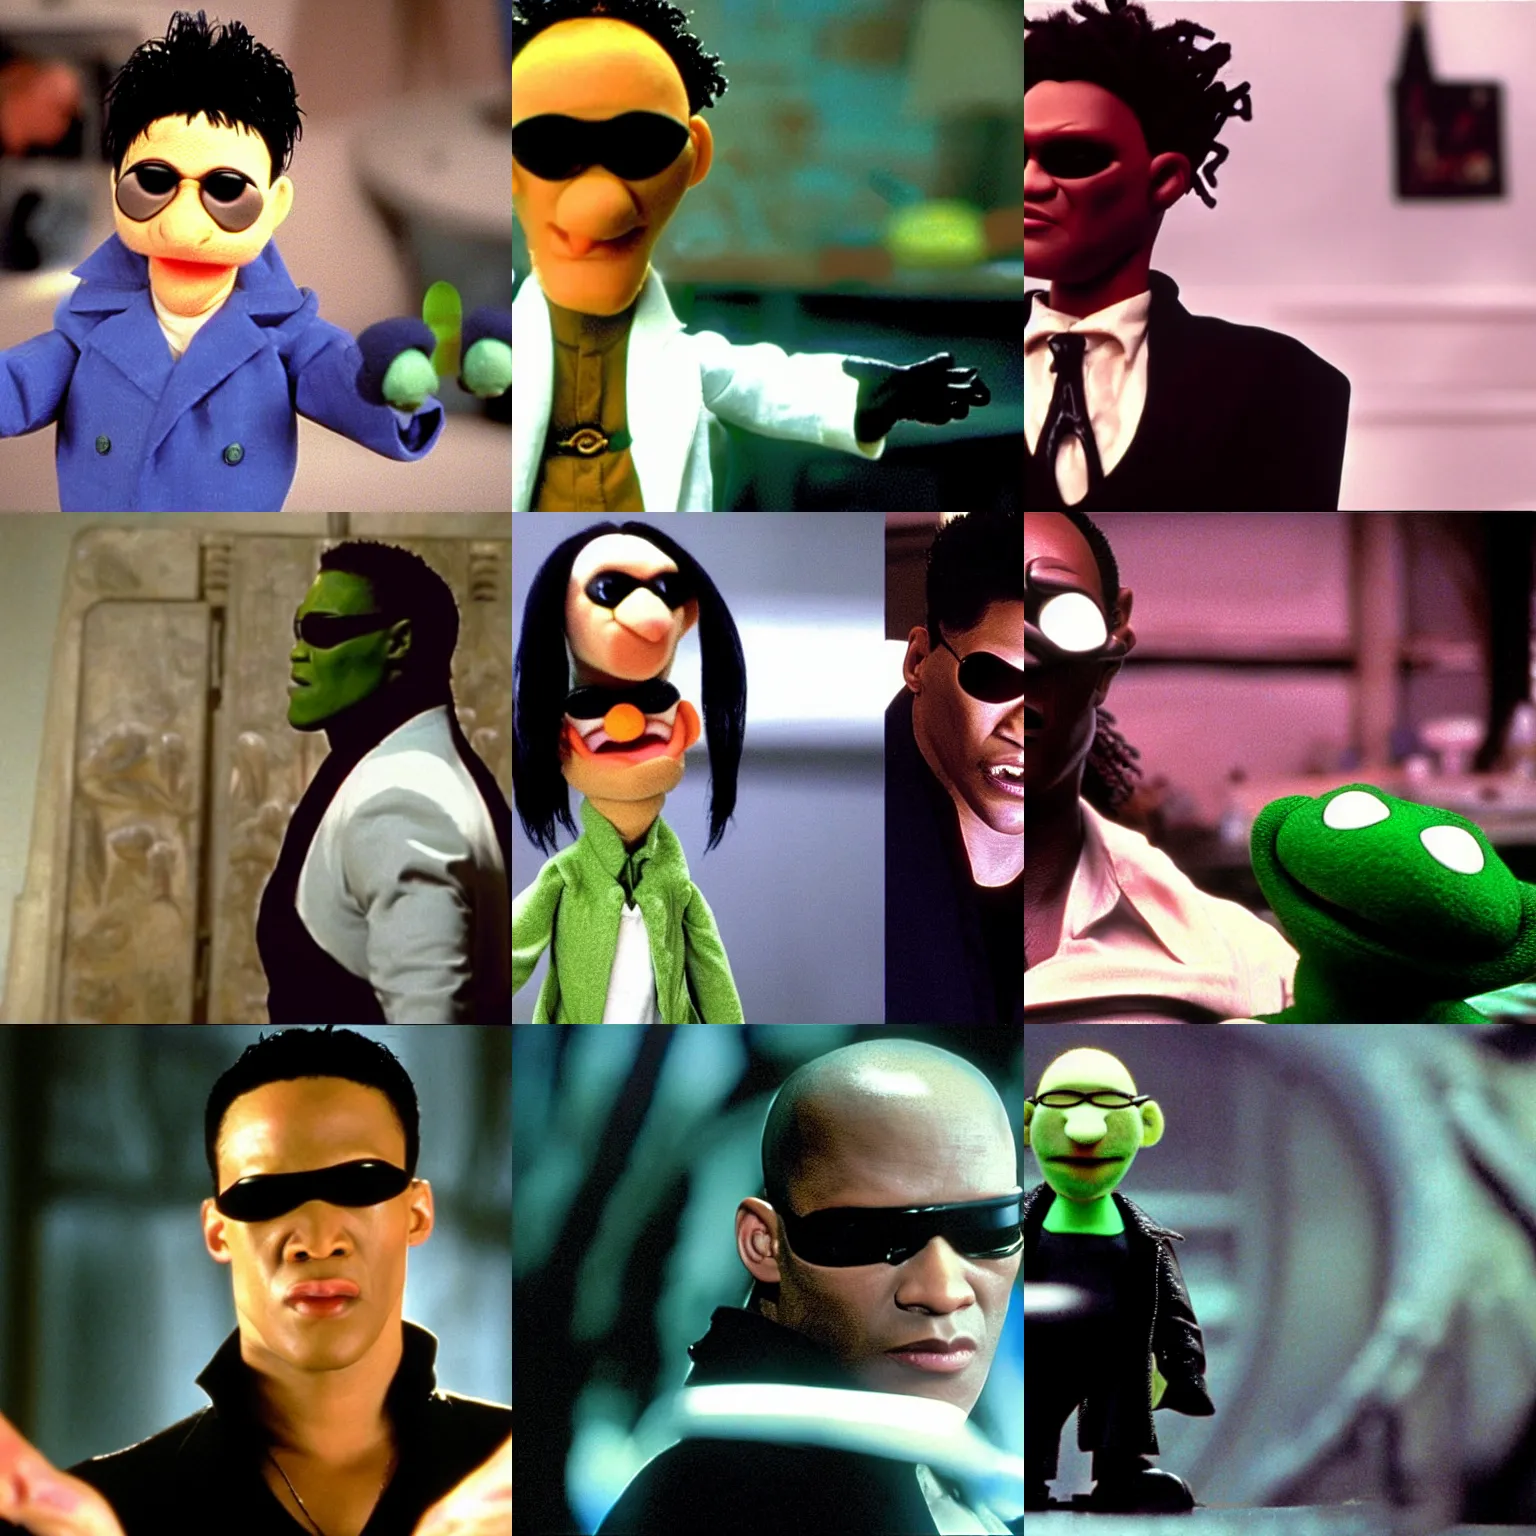 Prompt: A still of Morpheus from the Matrix (1999) as a Muppet